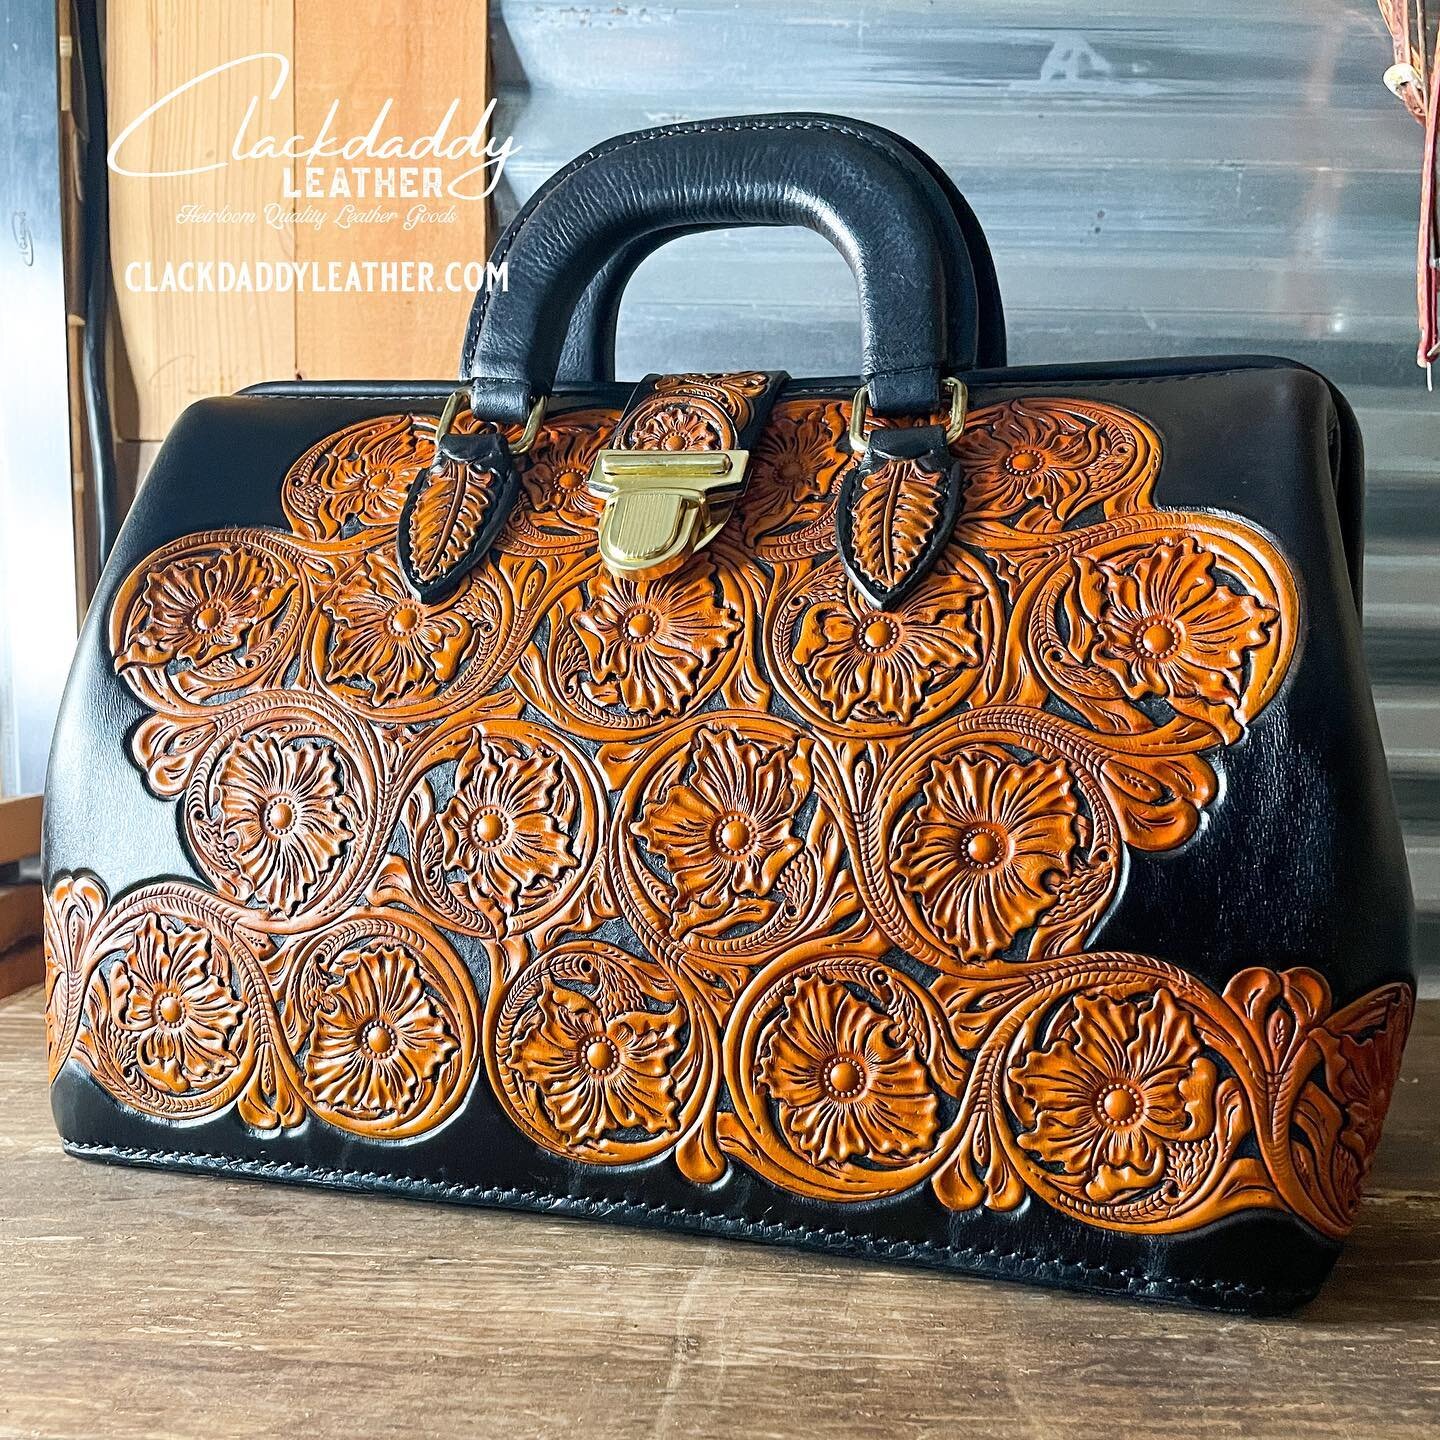 I guess you don&rsquo;t HAVE to be a doctor to carry this doctor&rsquo;s bag. Imagine how cool it&rsquo;d be if you were though🤔😎 #doctorbag #timeless #handmadeleather 

Bonus points if you tag a doctor #👩&zwj;⚕️ #👨&zwj;⚕️ #🩺

This bag is for sa